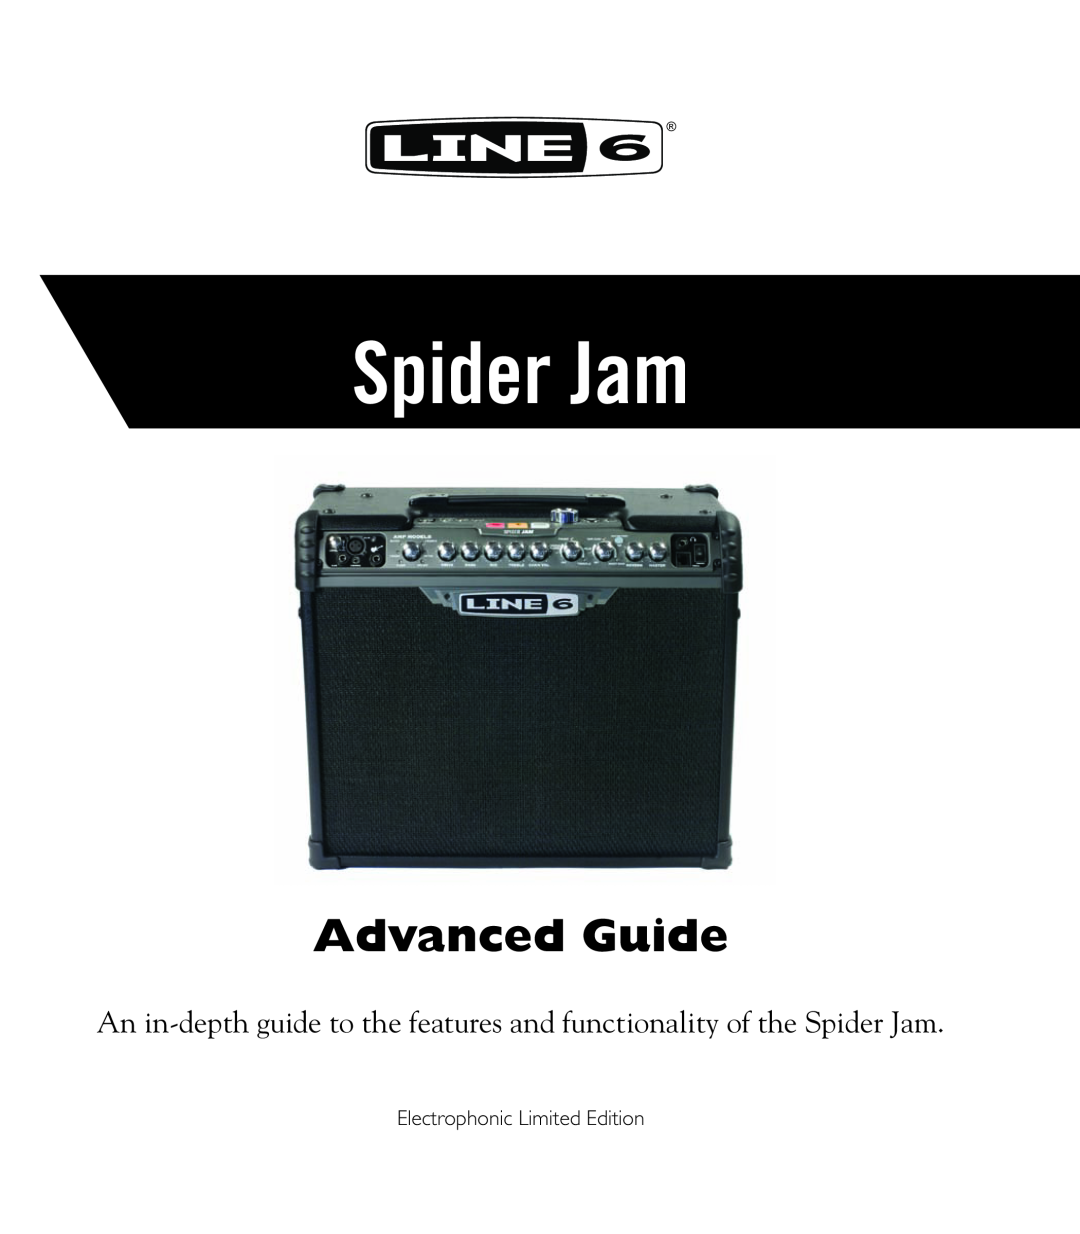 Line 6 Amp manual Advanced Guide, Spider Jam, Electrophonic Limited Edition 